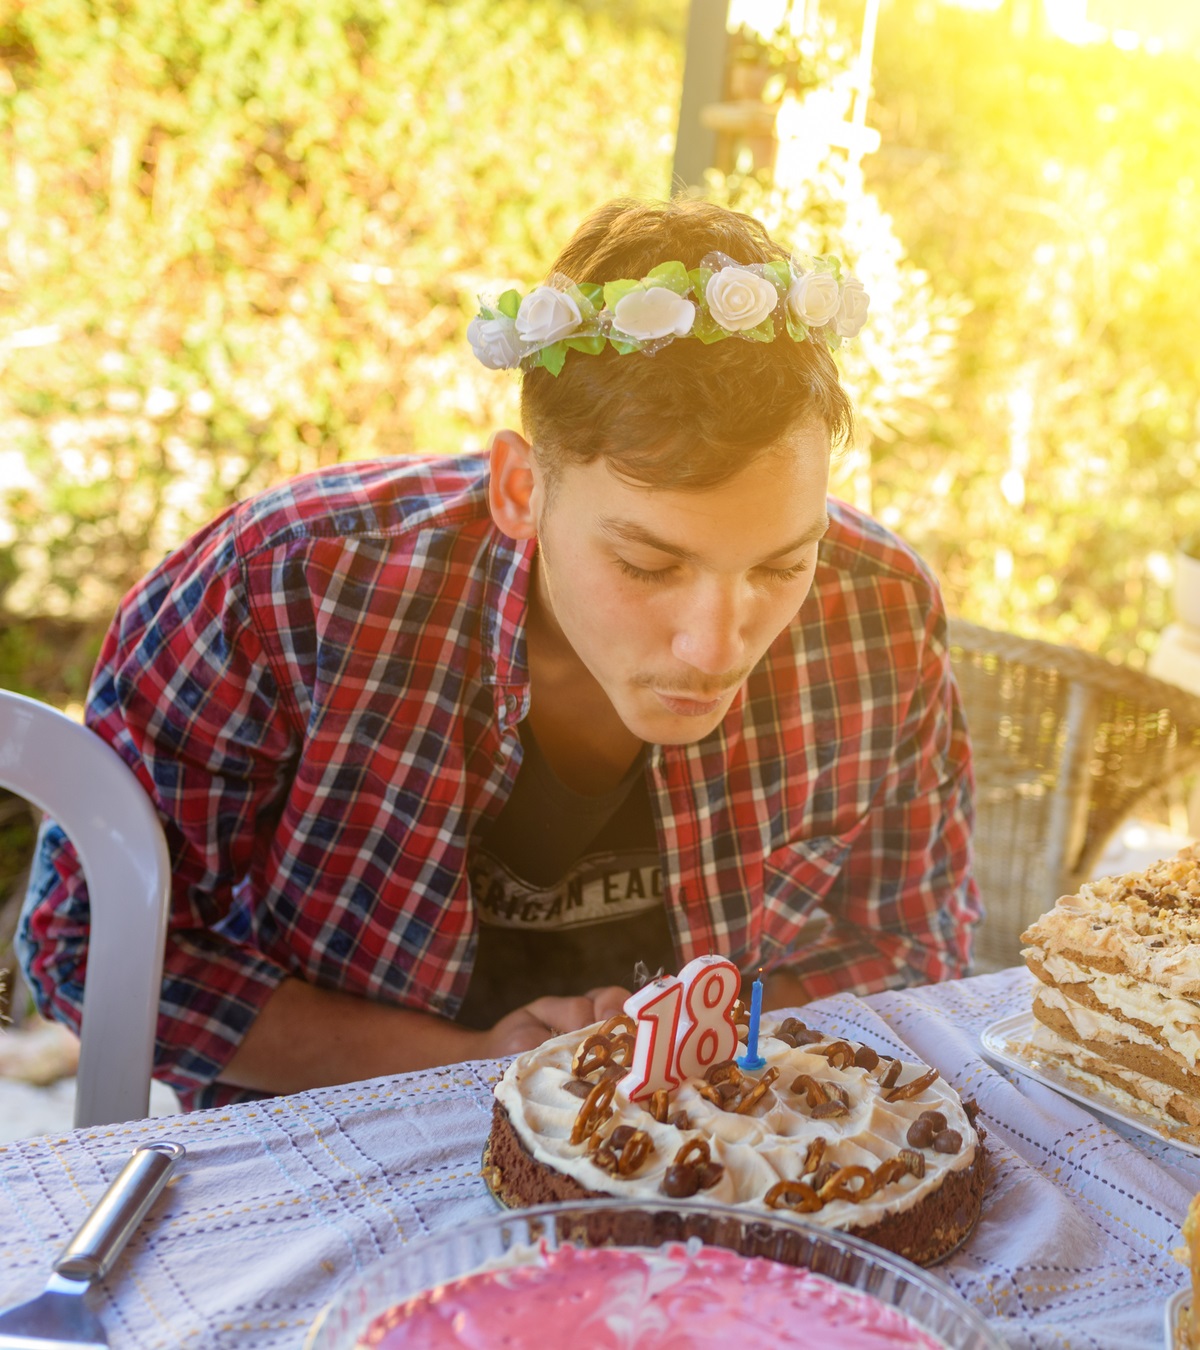 65 Things You Can Do When You Turn 18